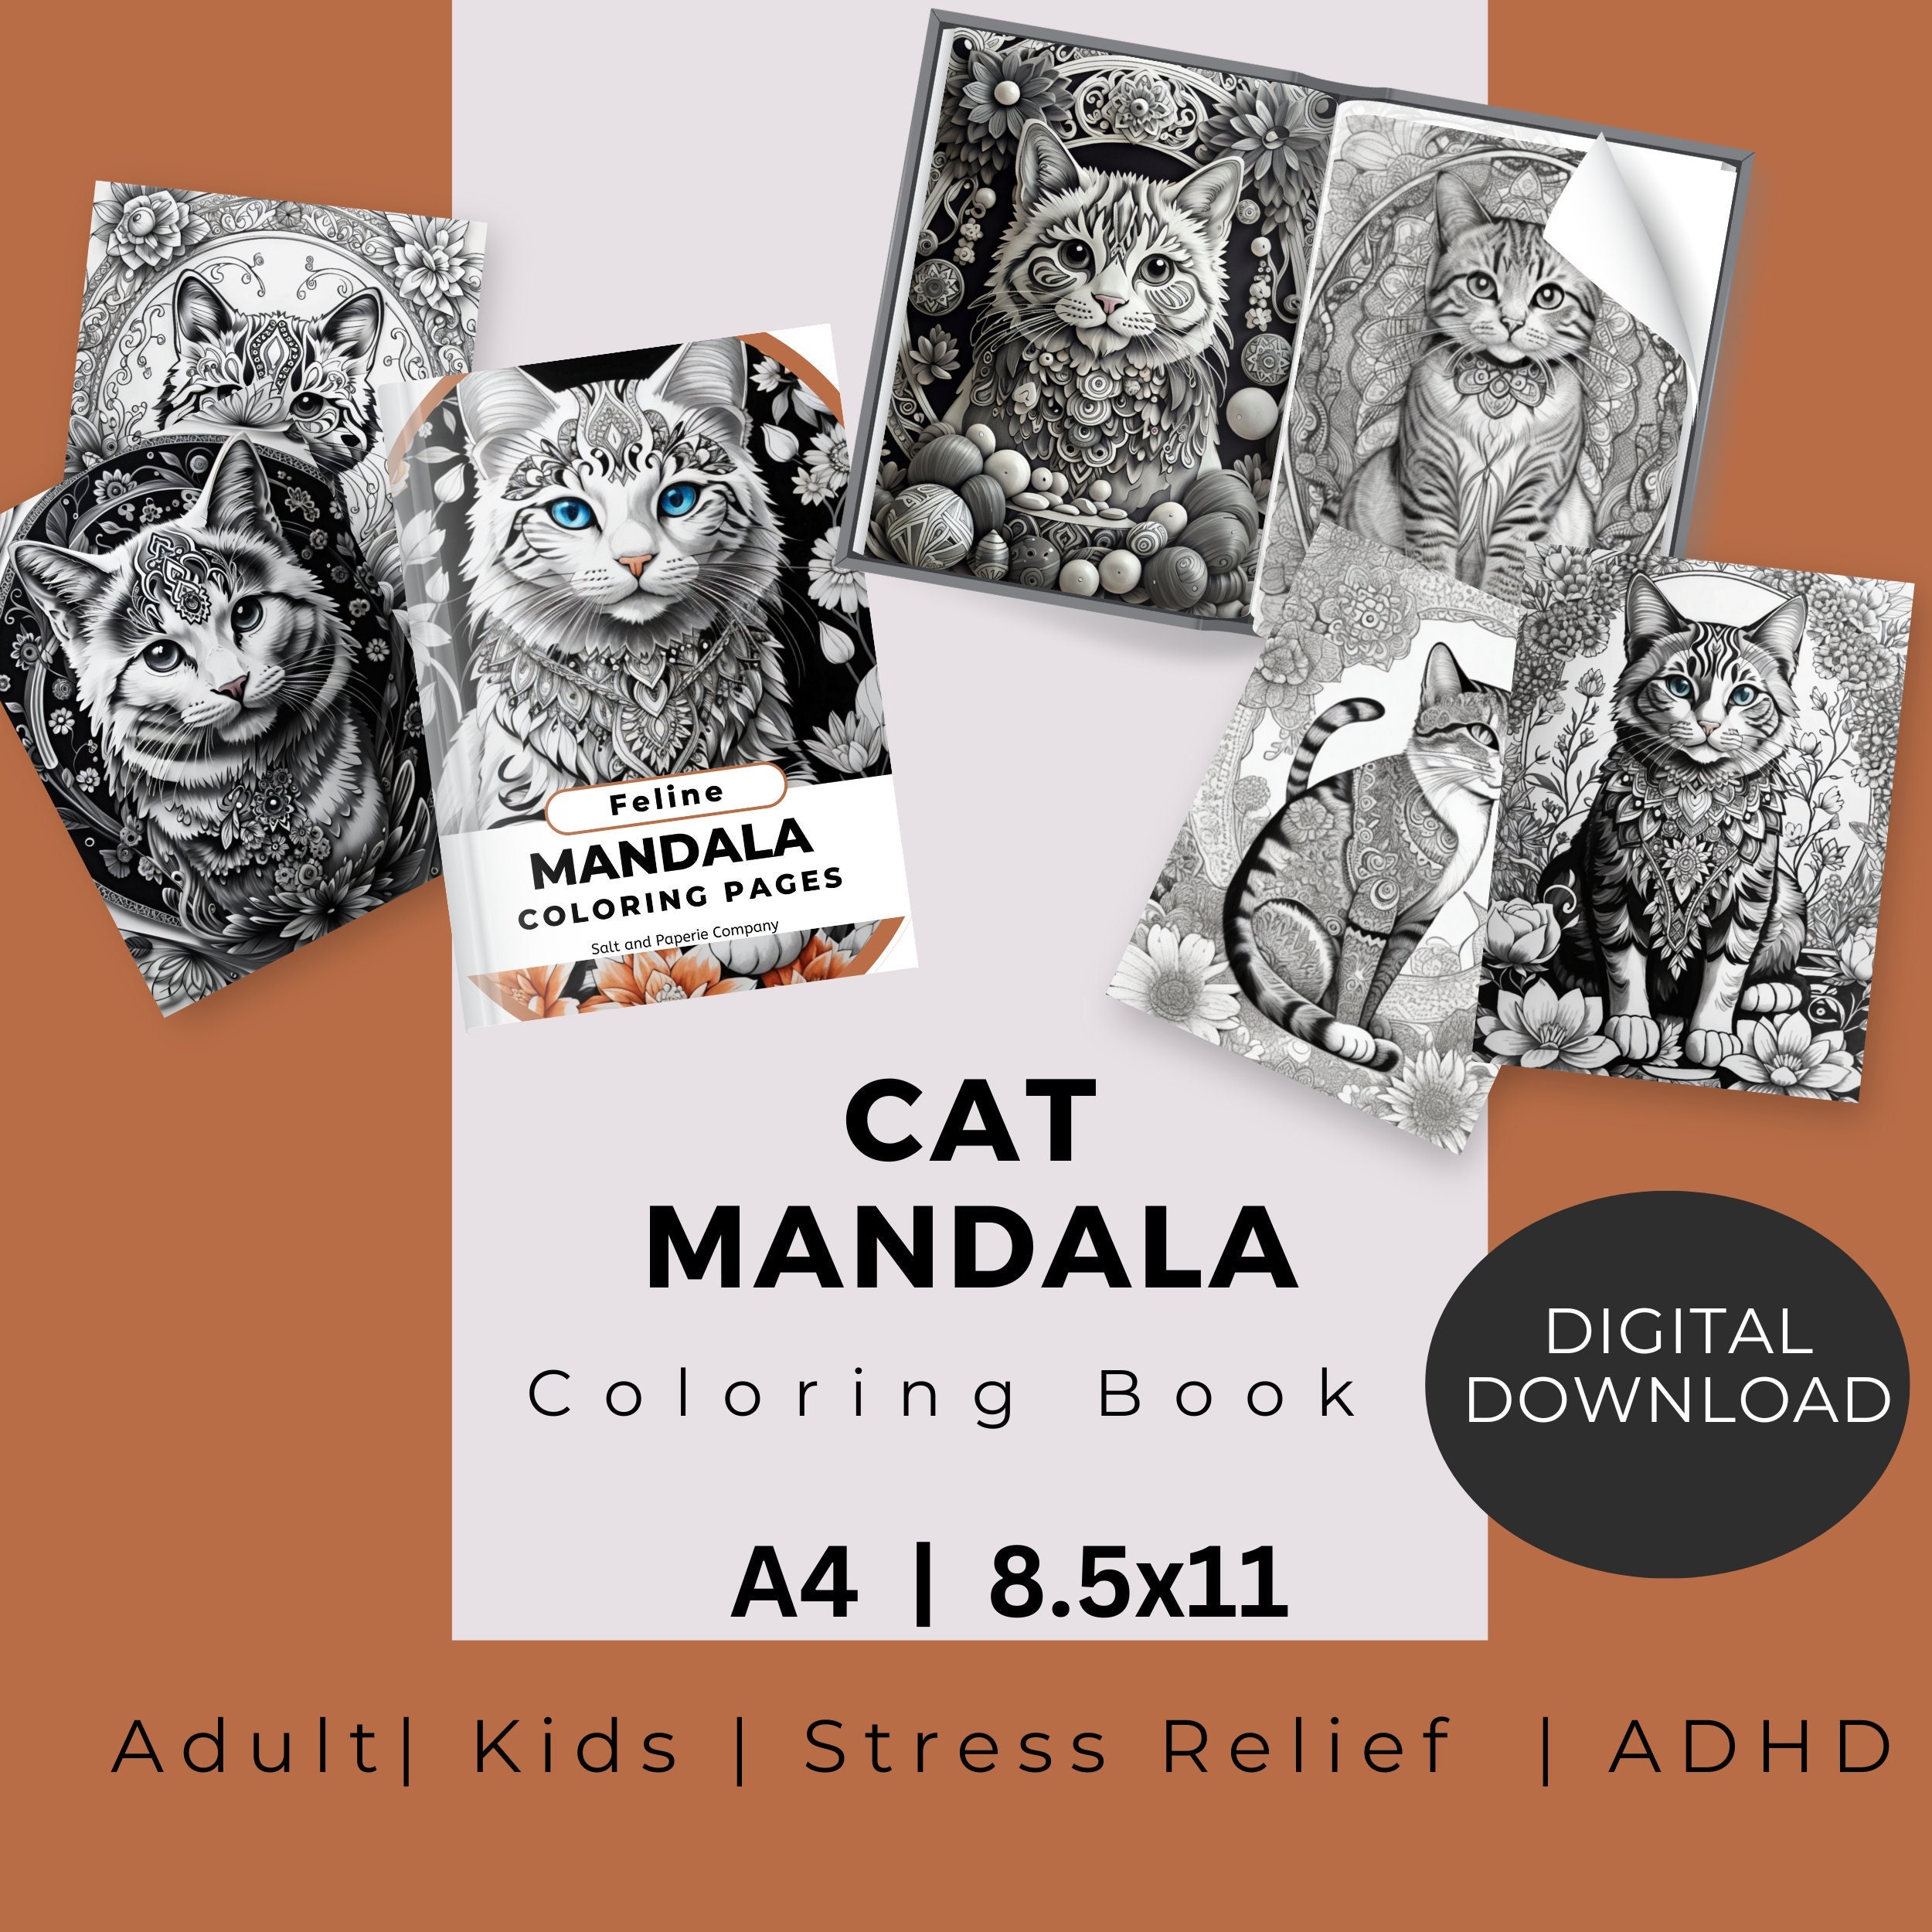 Lion Mandala Coloring Page Color Cat Animals Draw Drawing Paper Digital  File Download Adult Kids Education Art Project School Work 